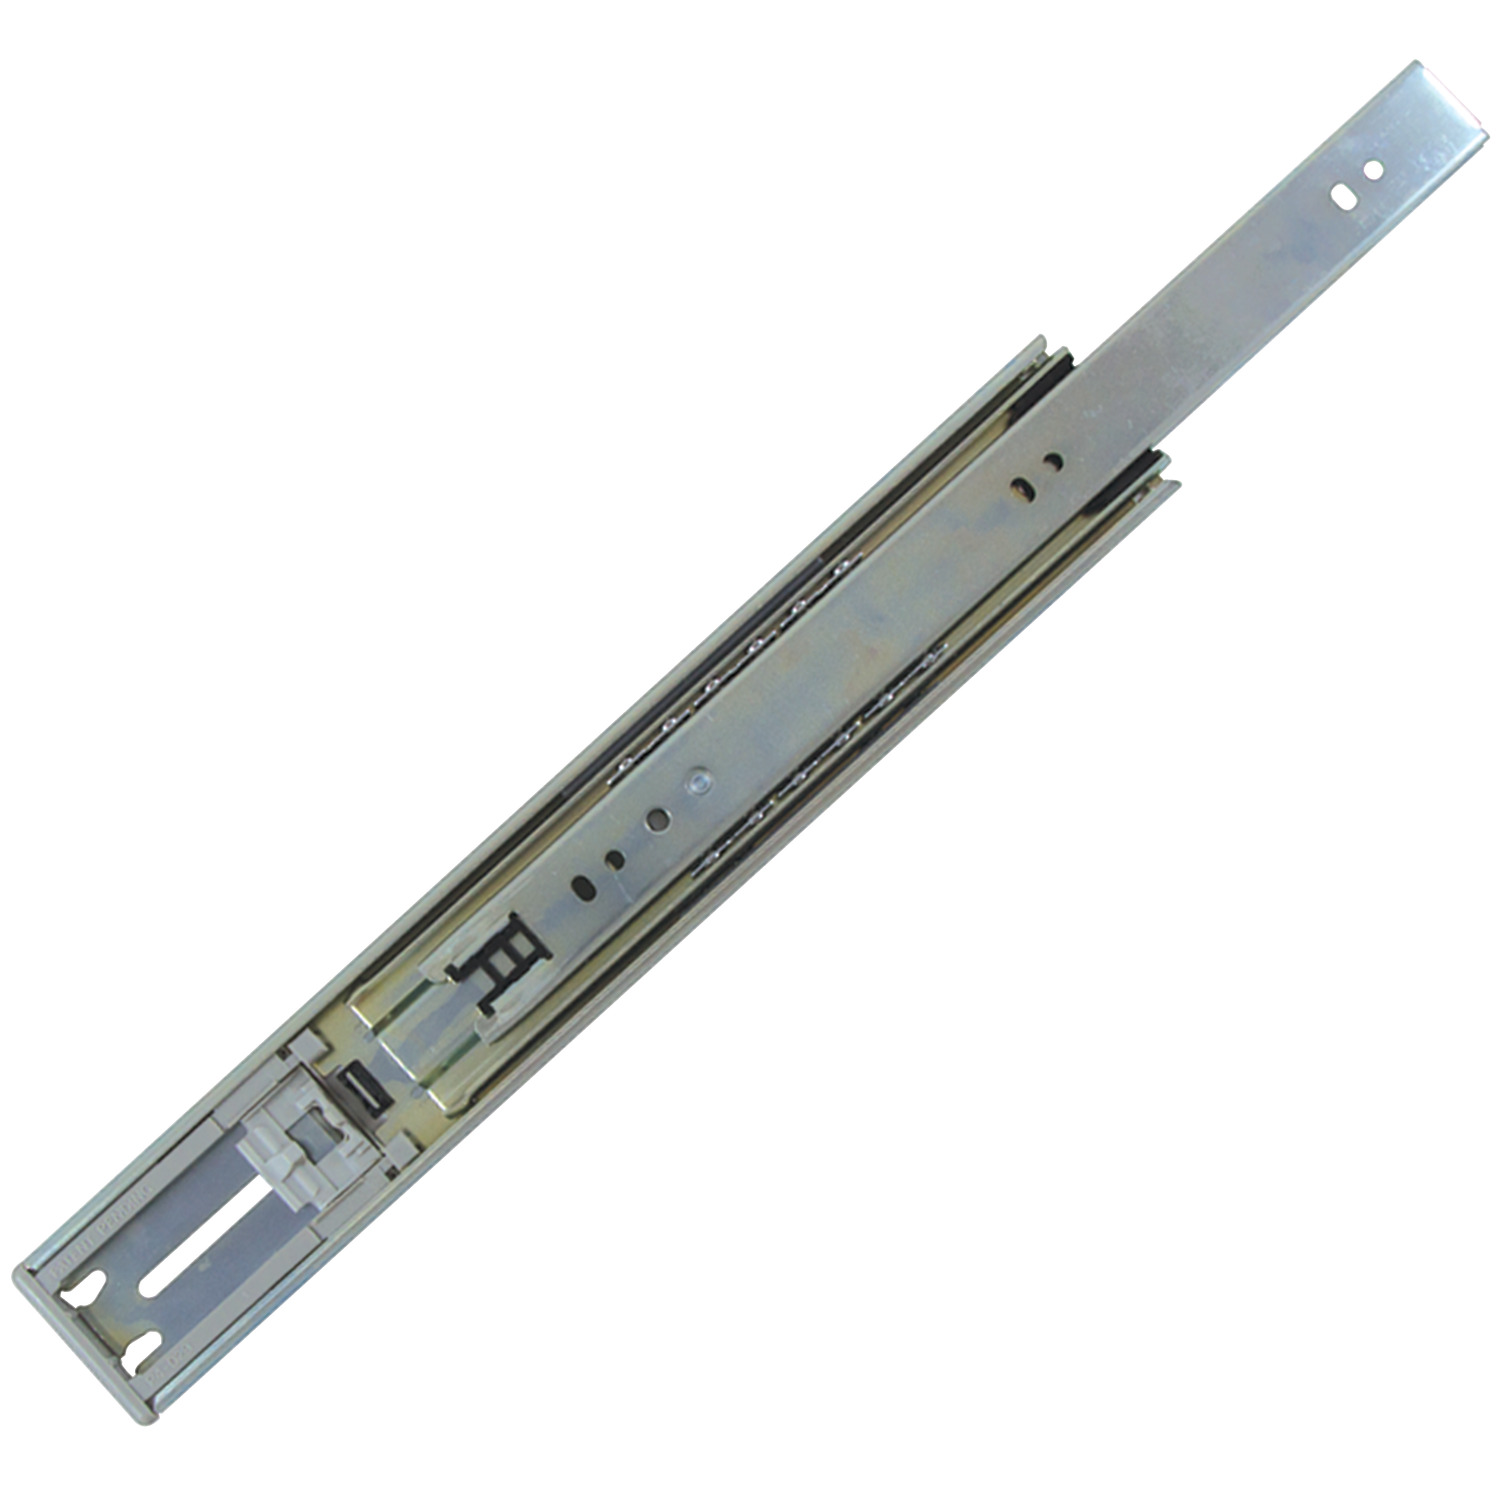 P4100.AC0350 Drawer Slide Full Extn Length 350; Load 45kg per pair. Sold Individually. Lever Disconnect; Soft Close